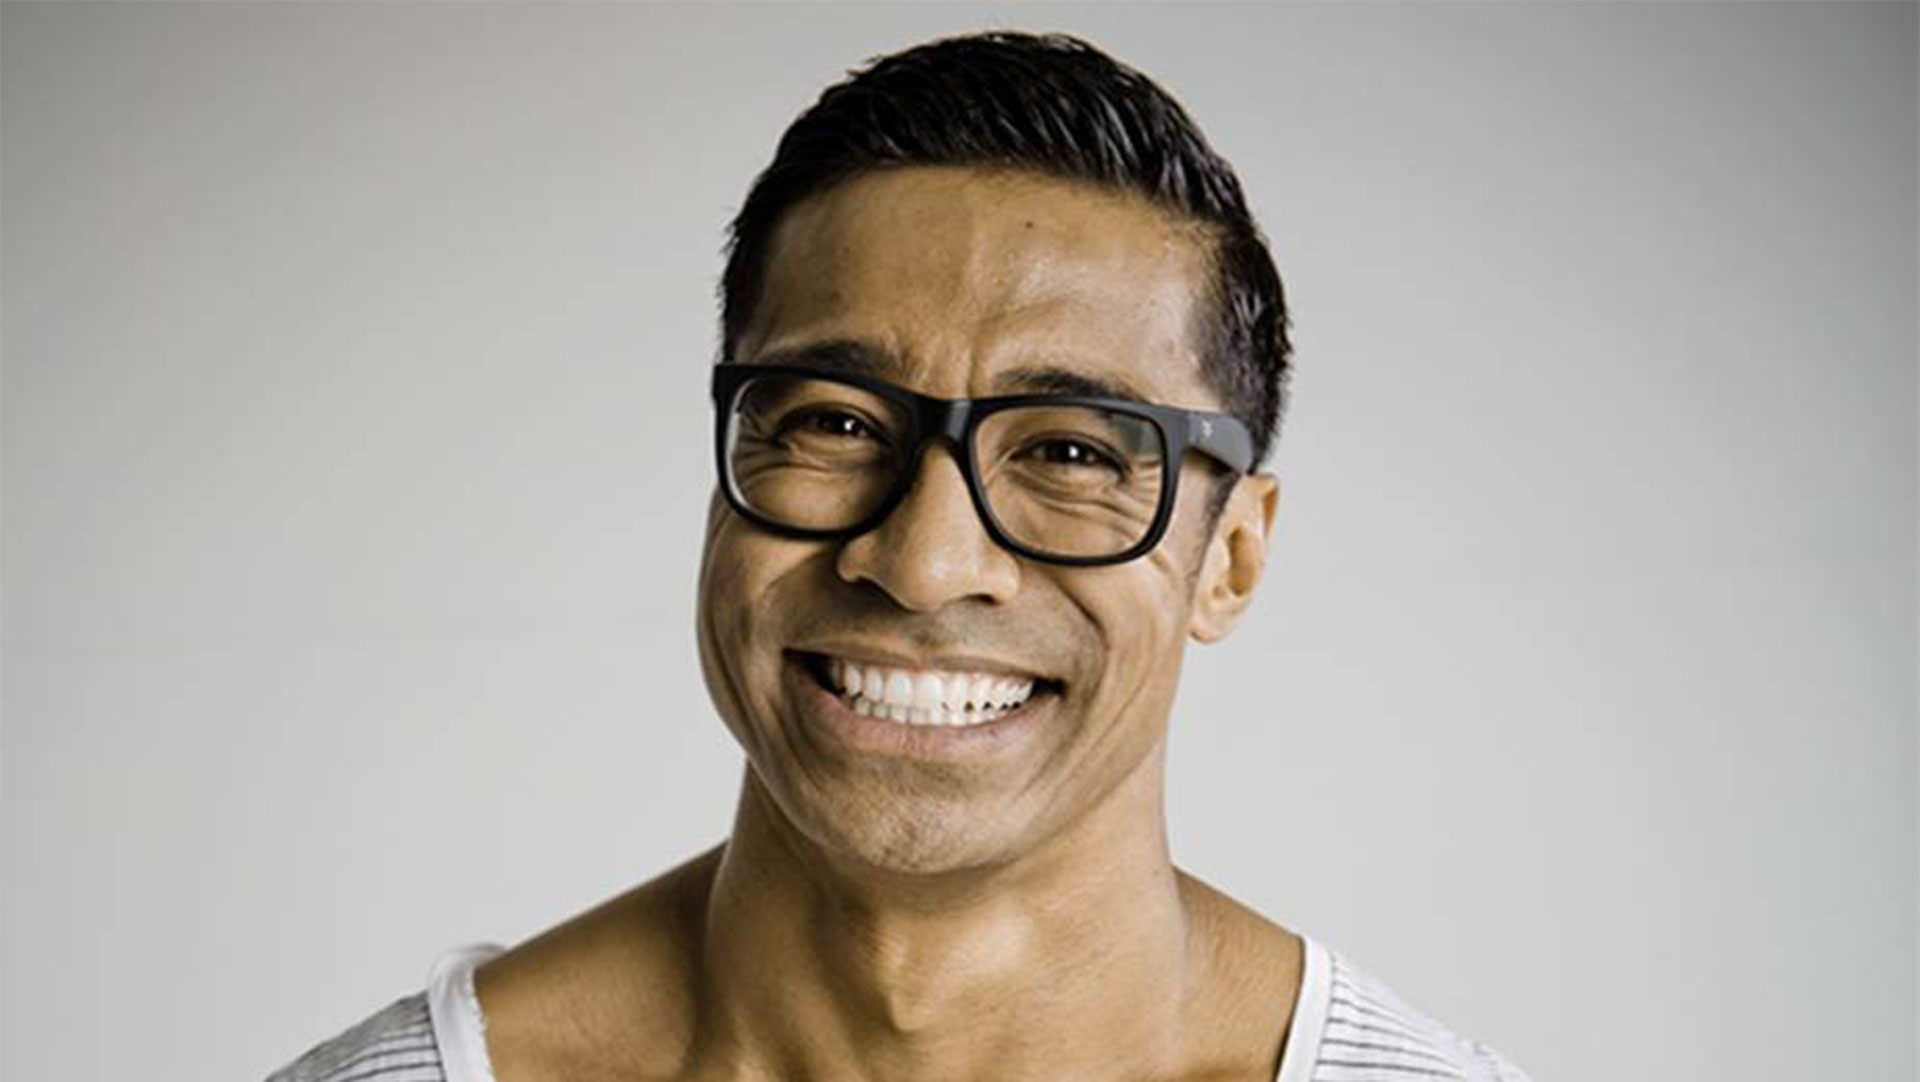 Shortland St actor Pua Magasiva caught drink driving